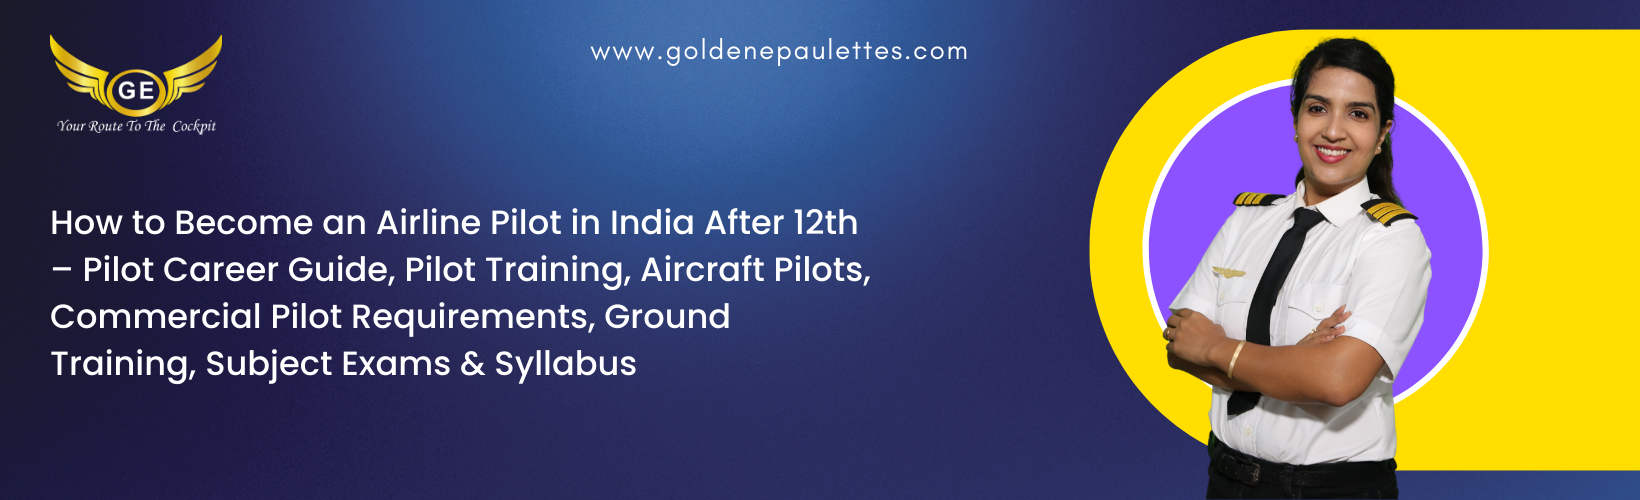 How to Become an Airline Pilot in India After 12th